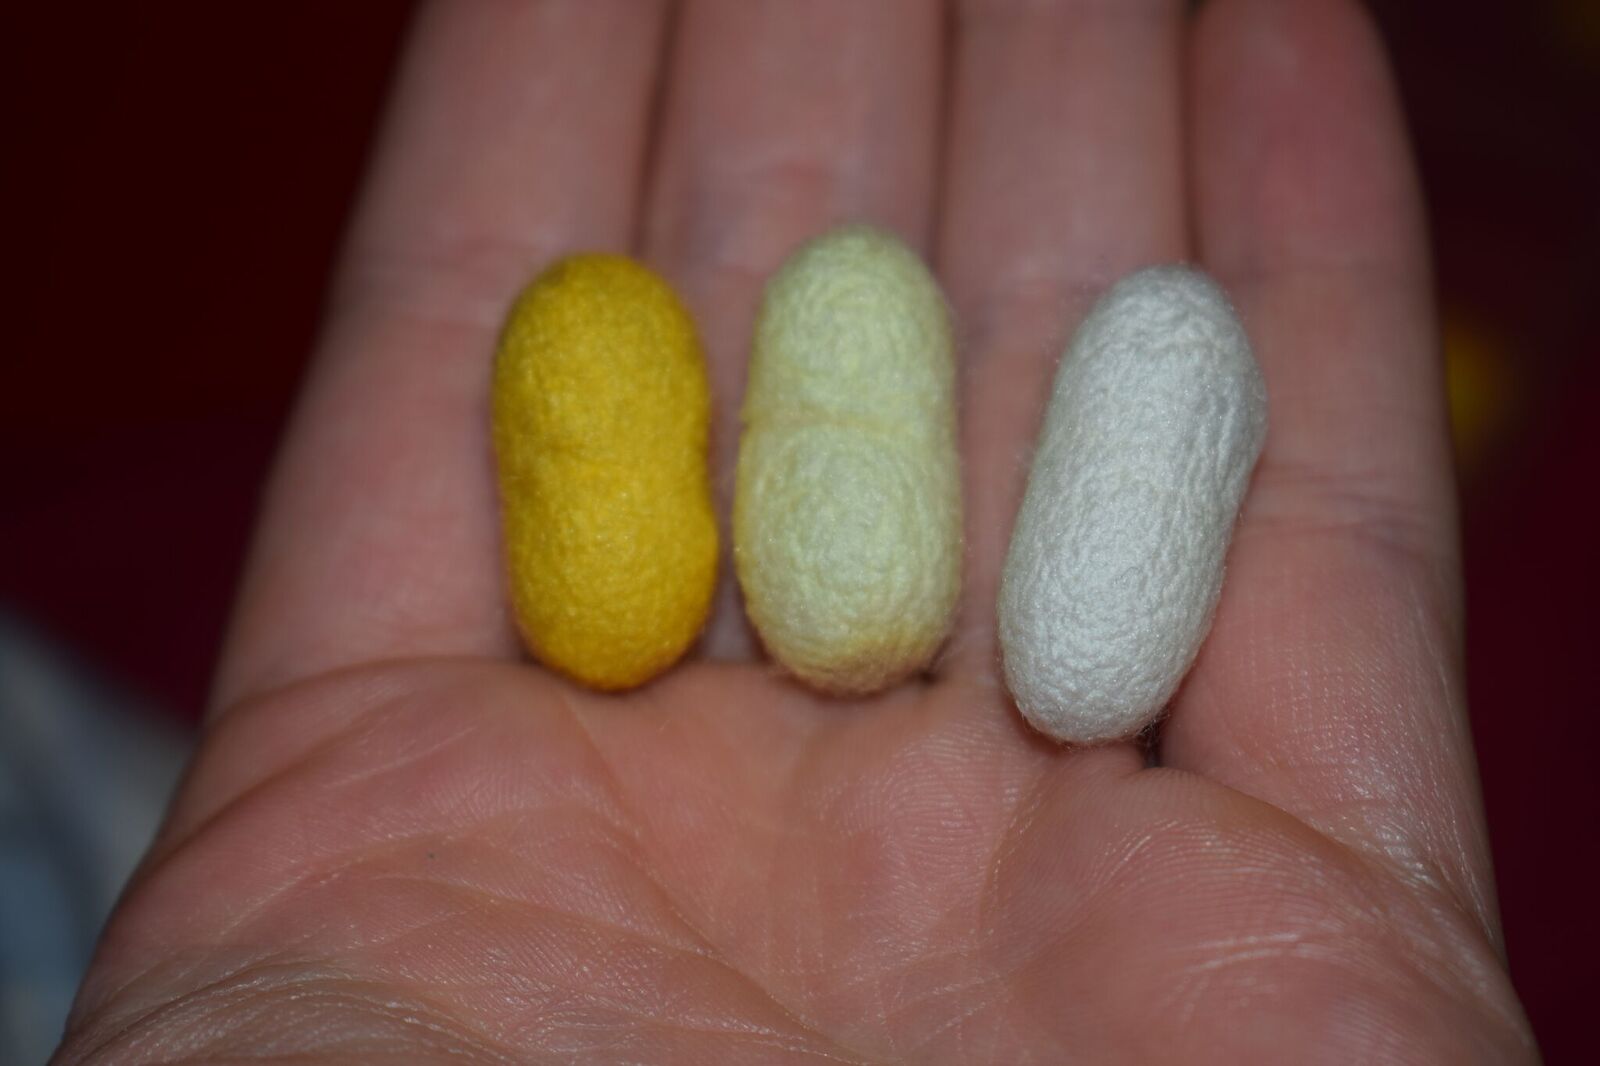 Each colour of Silk cocoon in a hand